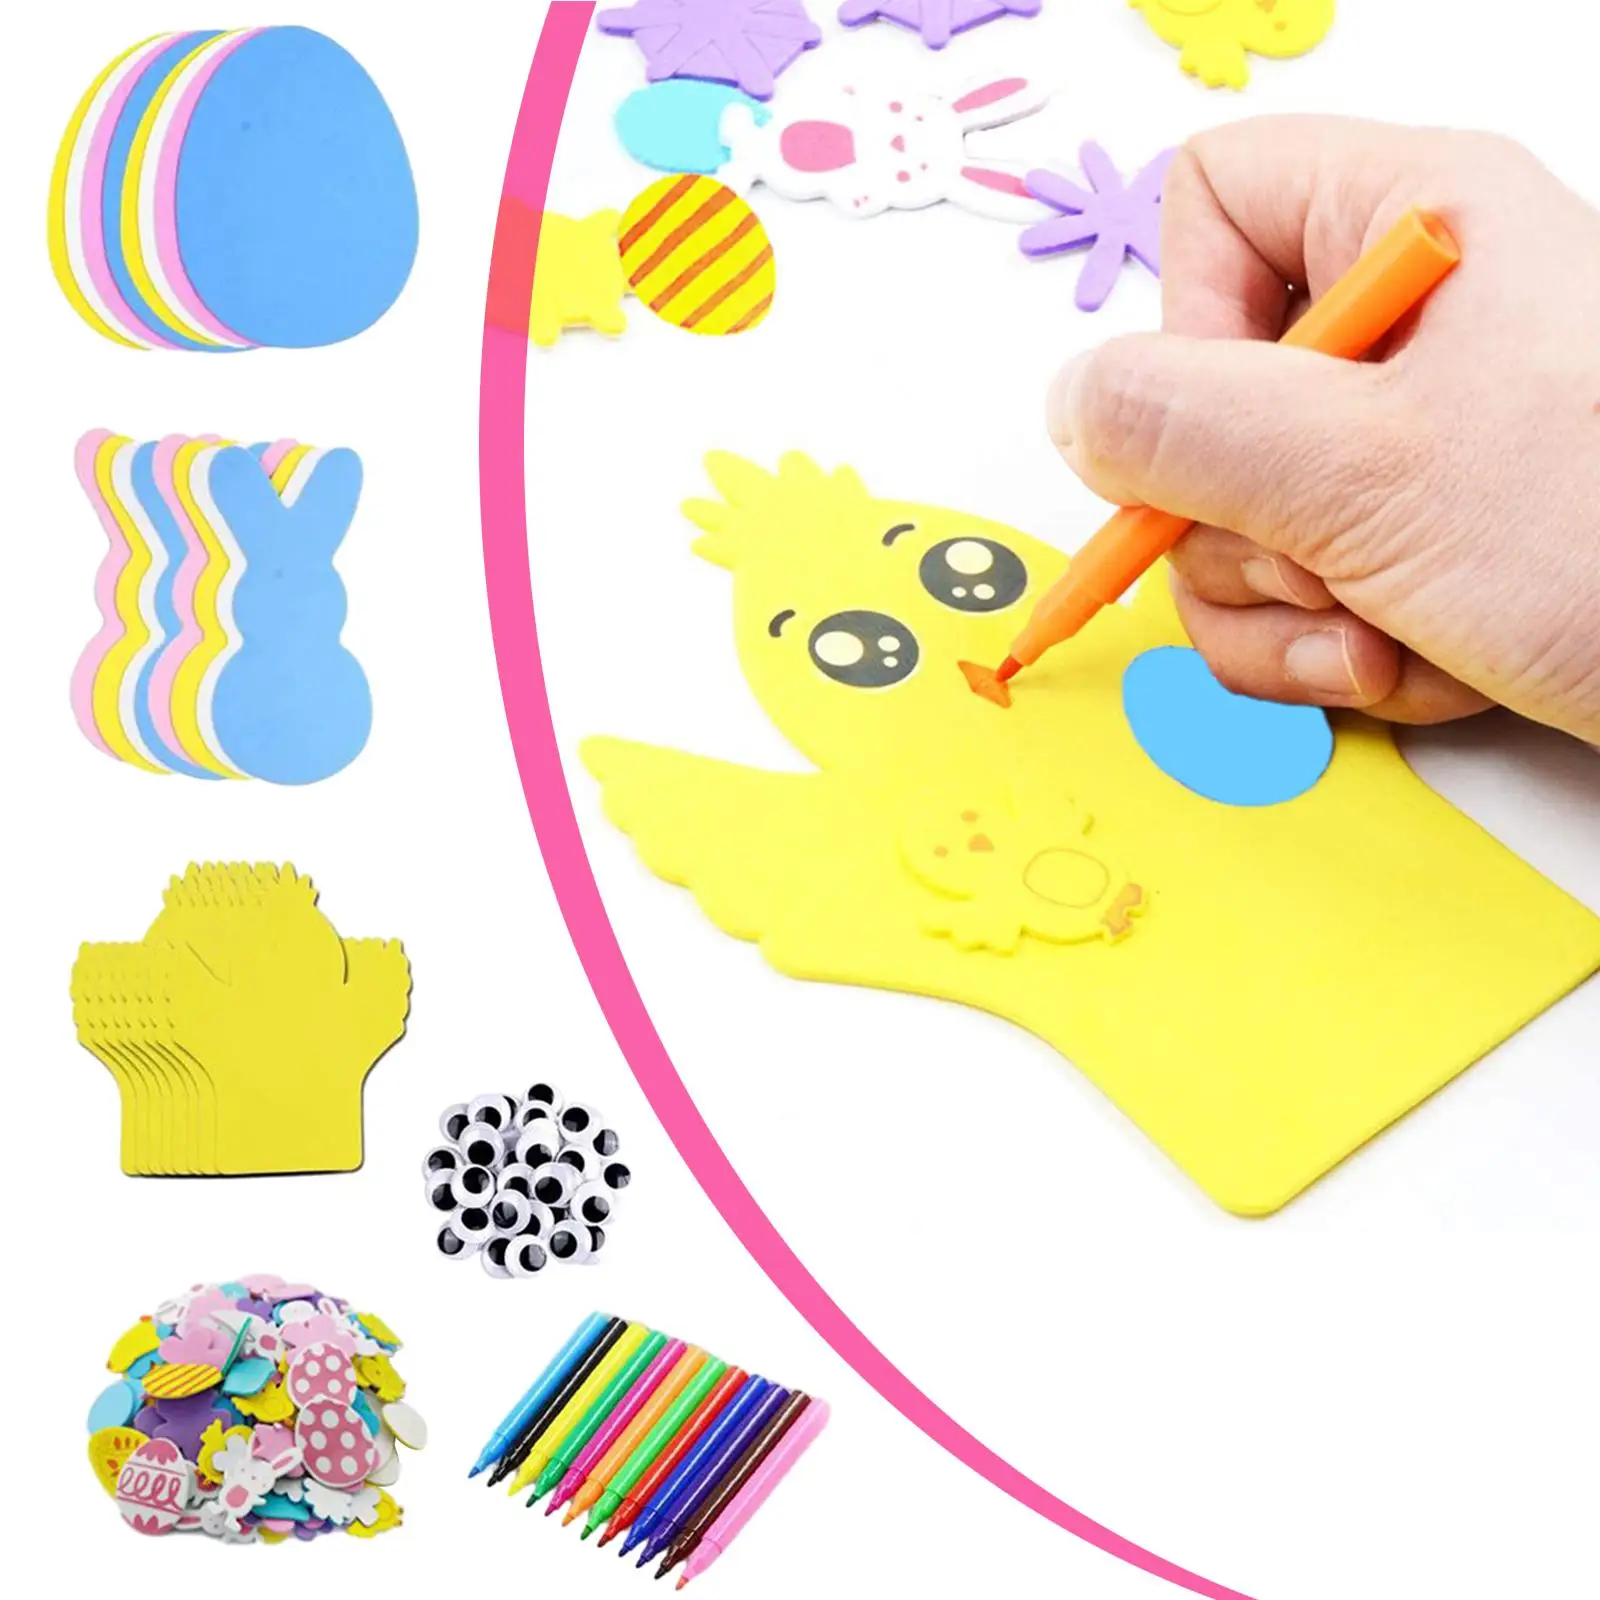 Easter Foam Stickers Set for Boys Girls Rabbit Chick Egg Home Classroom Activities Party Favors 191Pcs Easter Crafts Arts Crafts